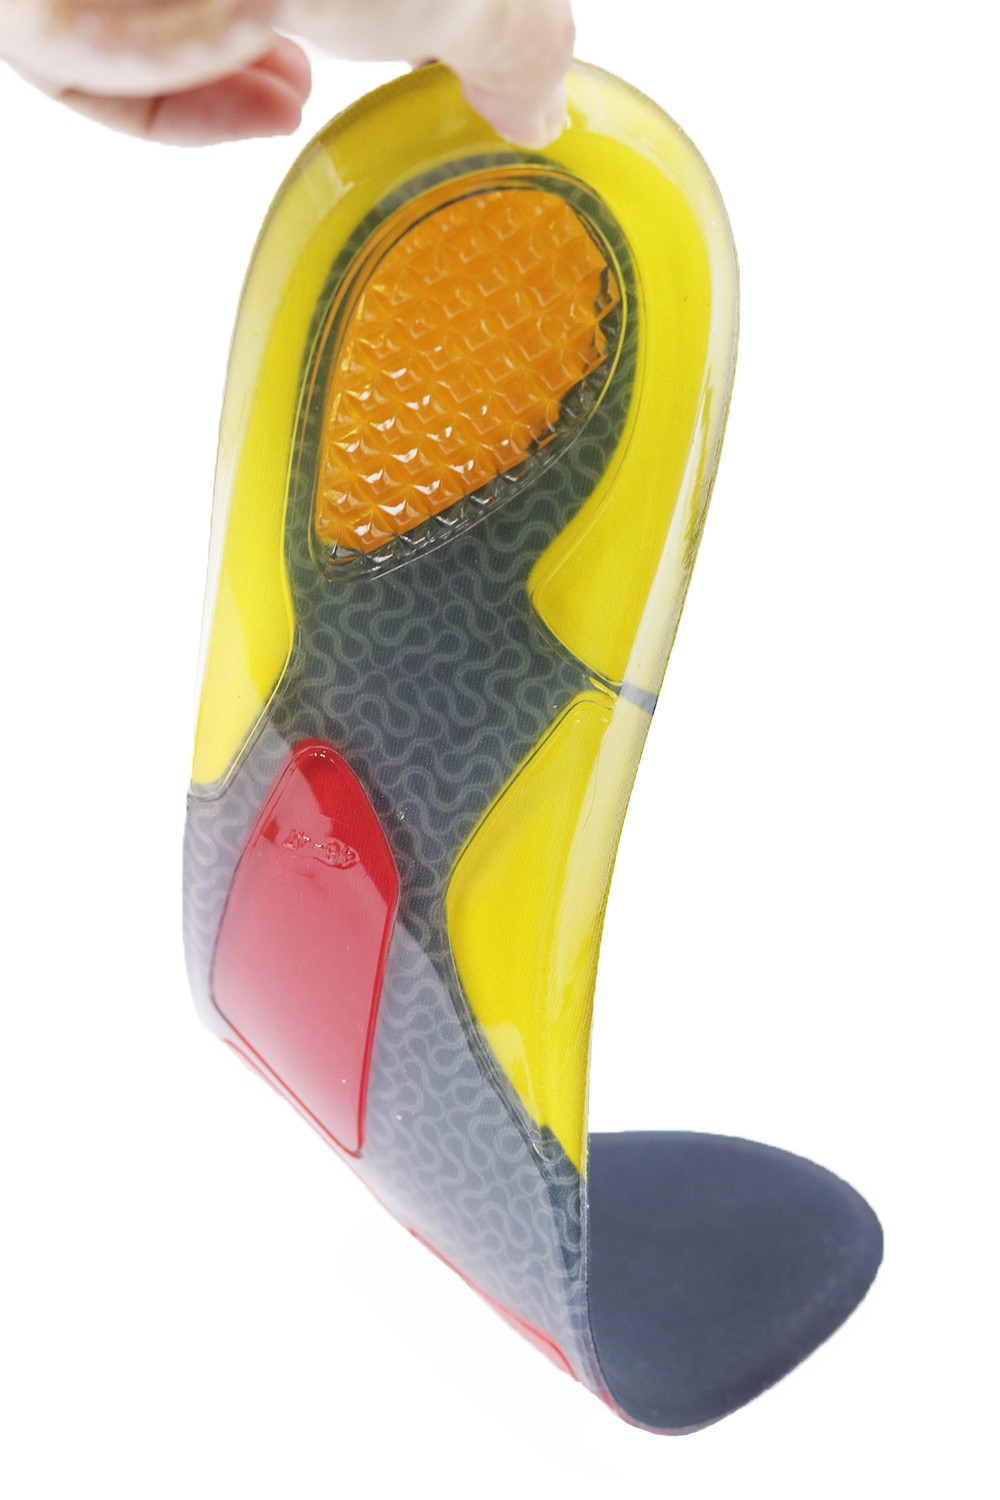 S-King gel insoles for sandals company for forefoot pad-5